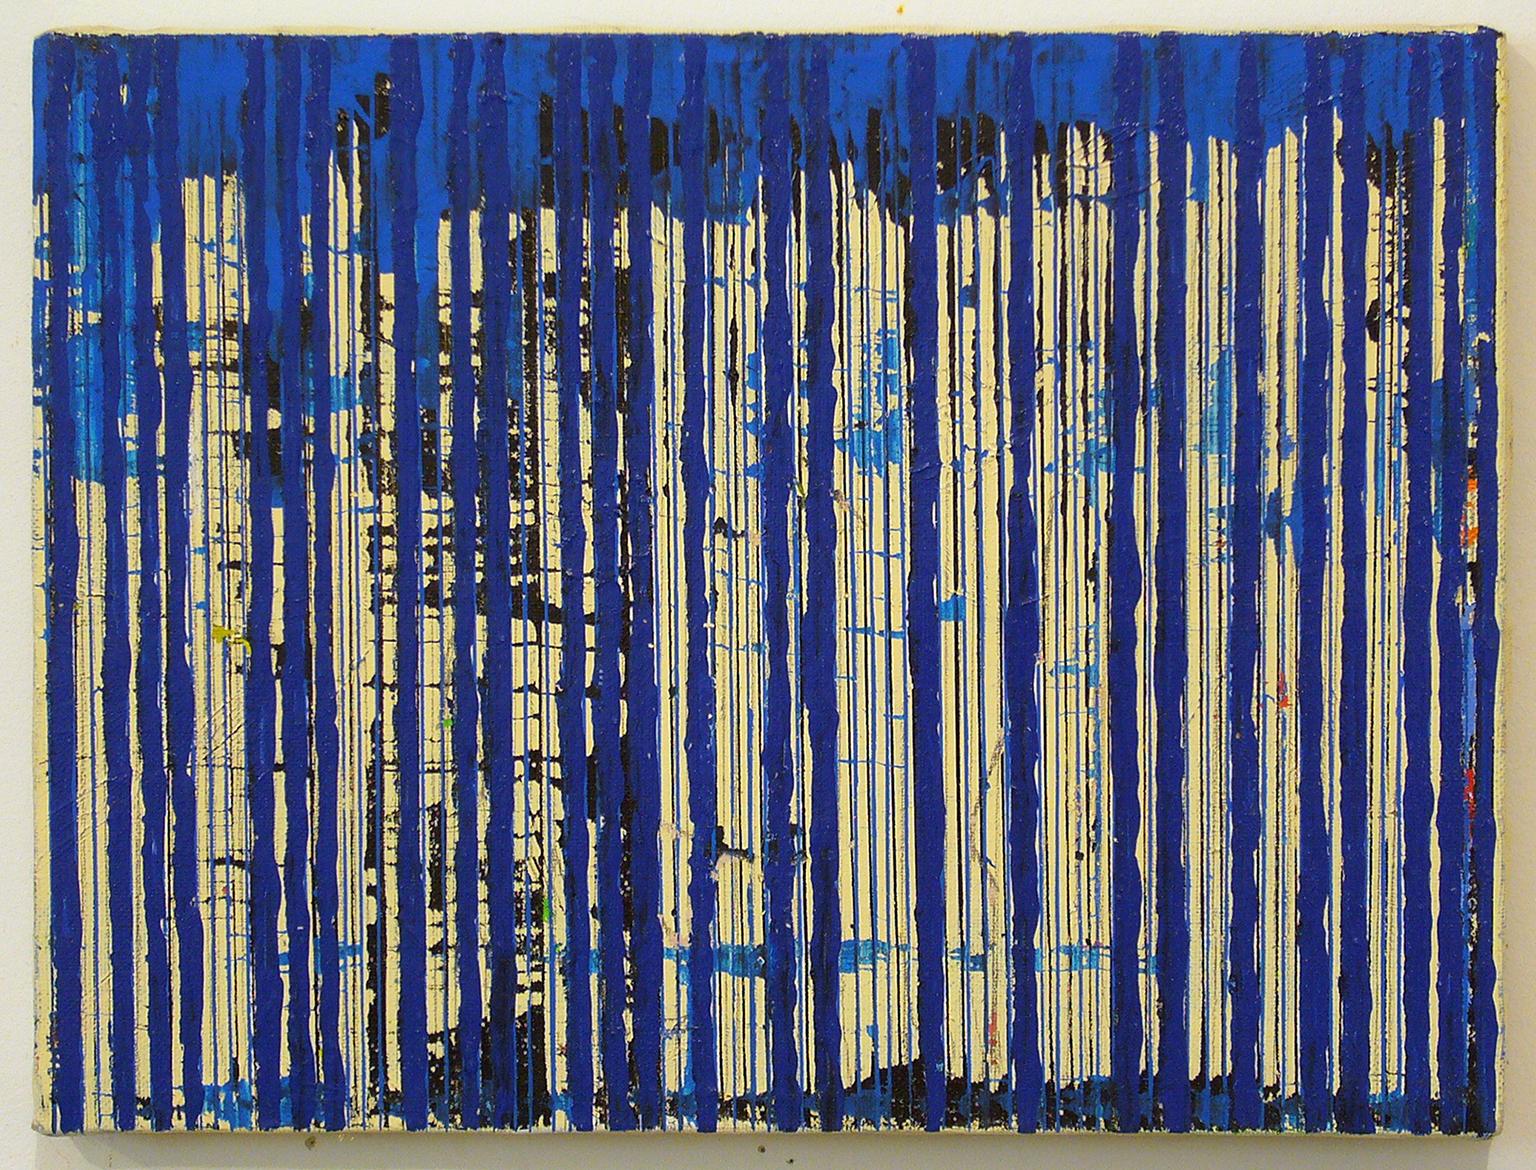 Untitled Blue Stripes by Ann Chisholm.
Mixed media
Ink and acrylic on canvas. 

Communication or communicating is a theme in Ann Chisholm's work, especially in the collages. She uses words, numbers, and symbols to give visual hints. Morse Code is an